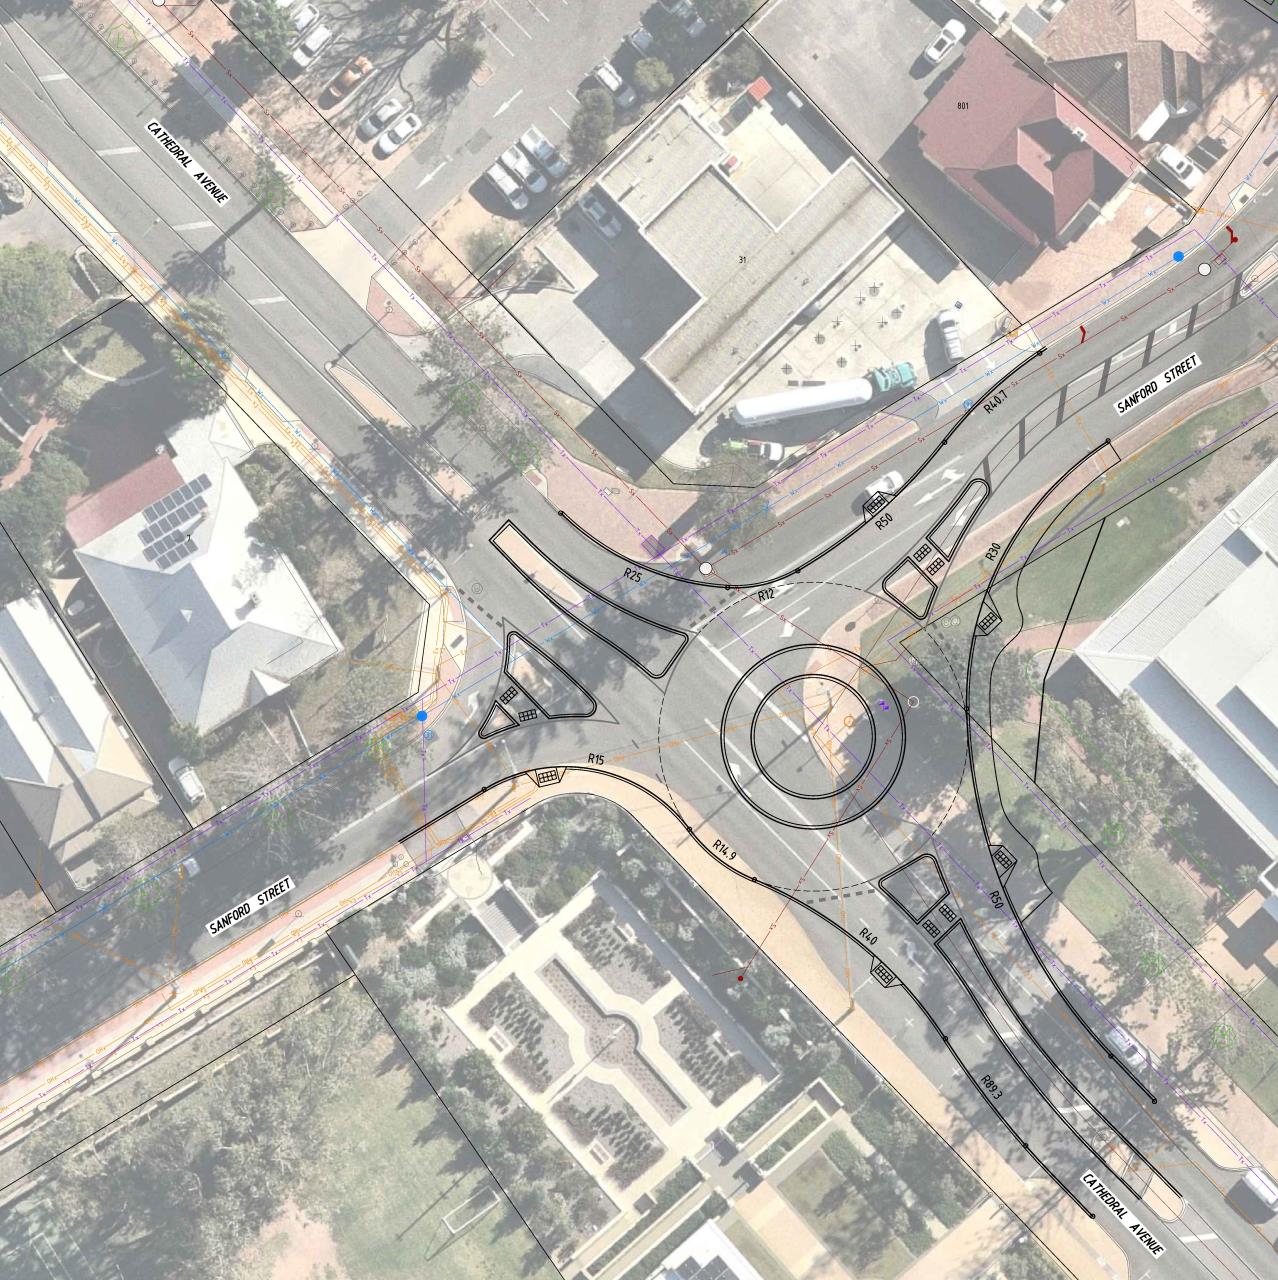 Cathedral Avenue Sanford Street roundabout design